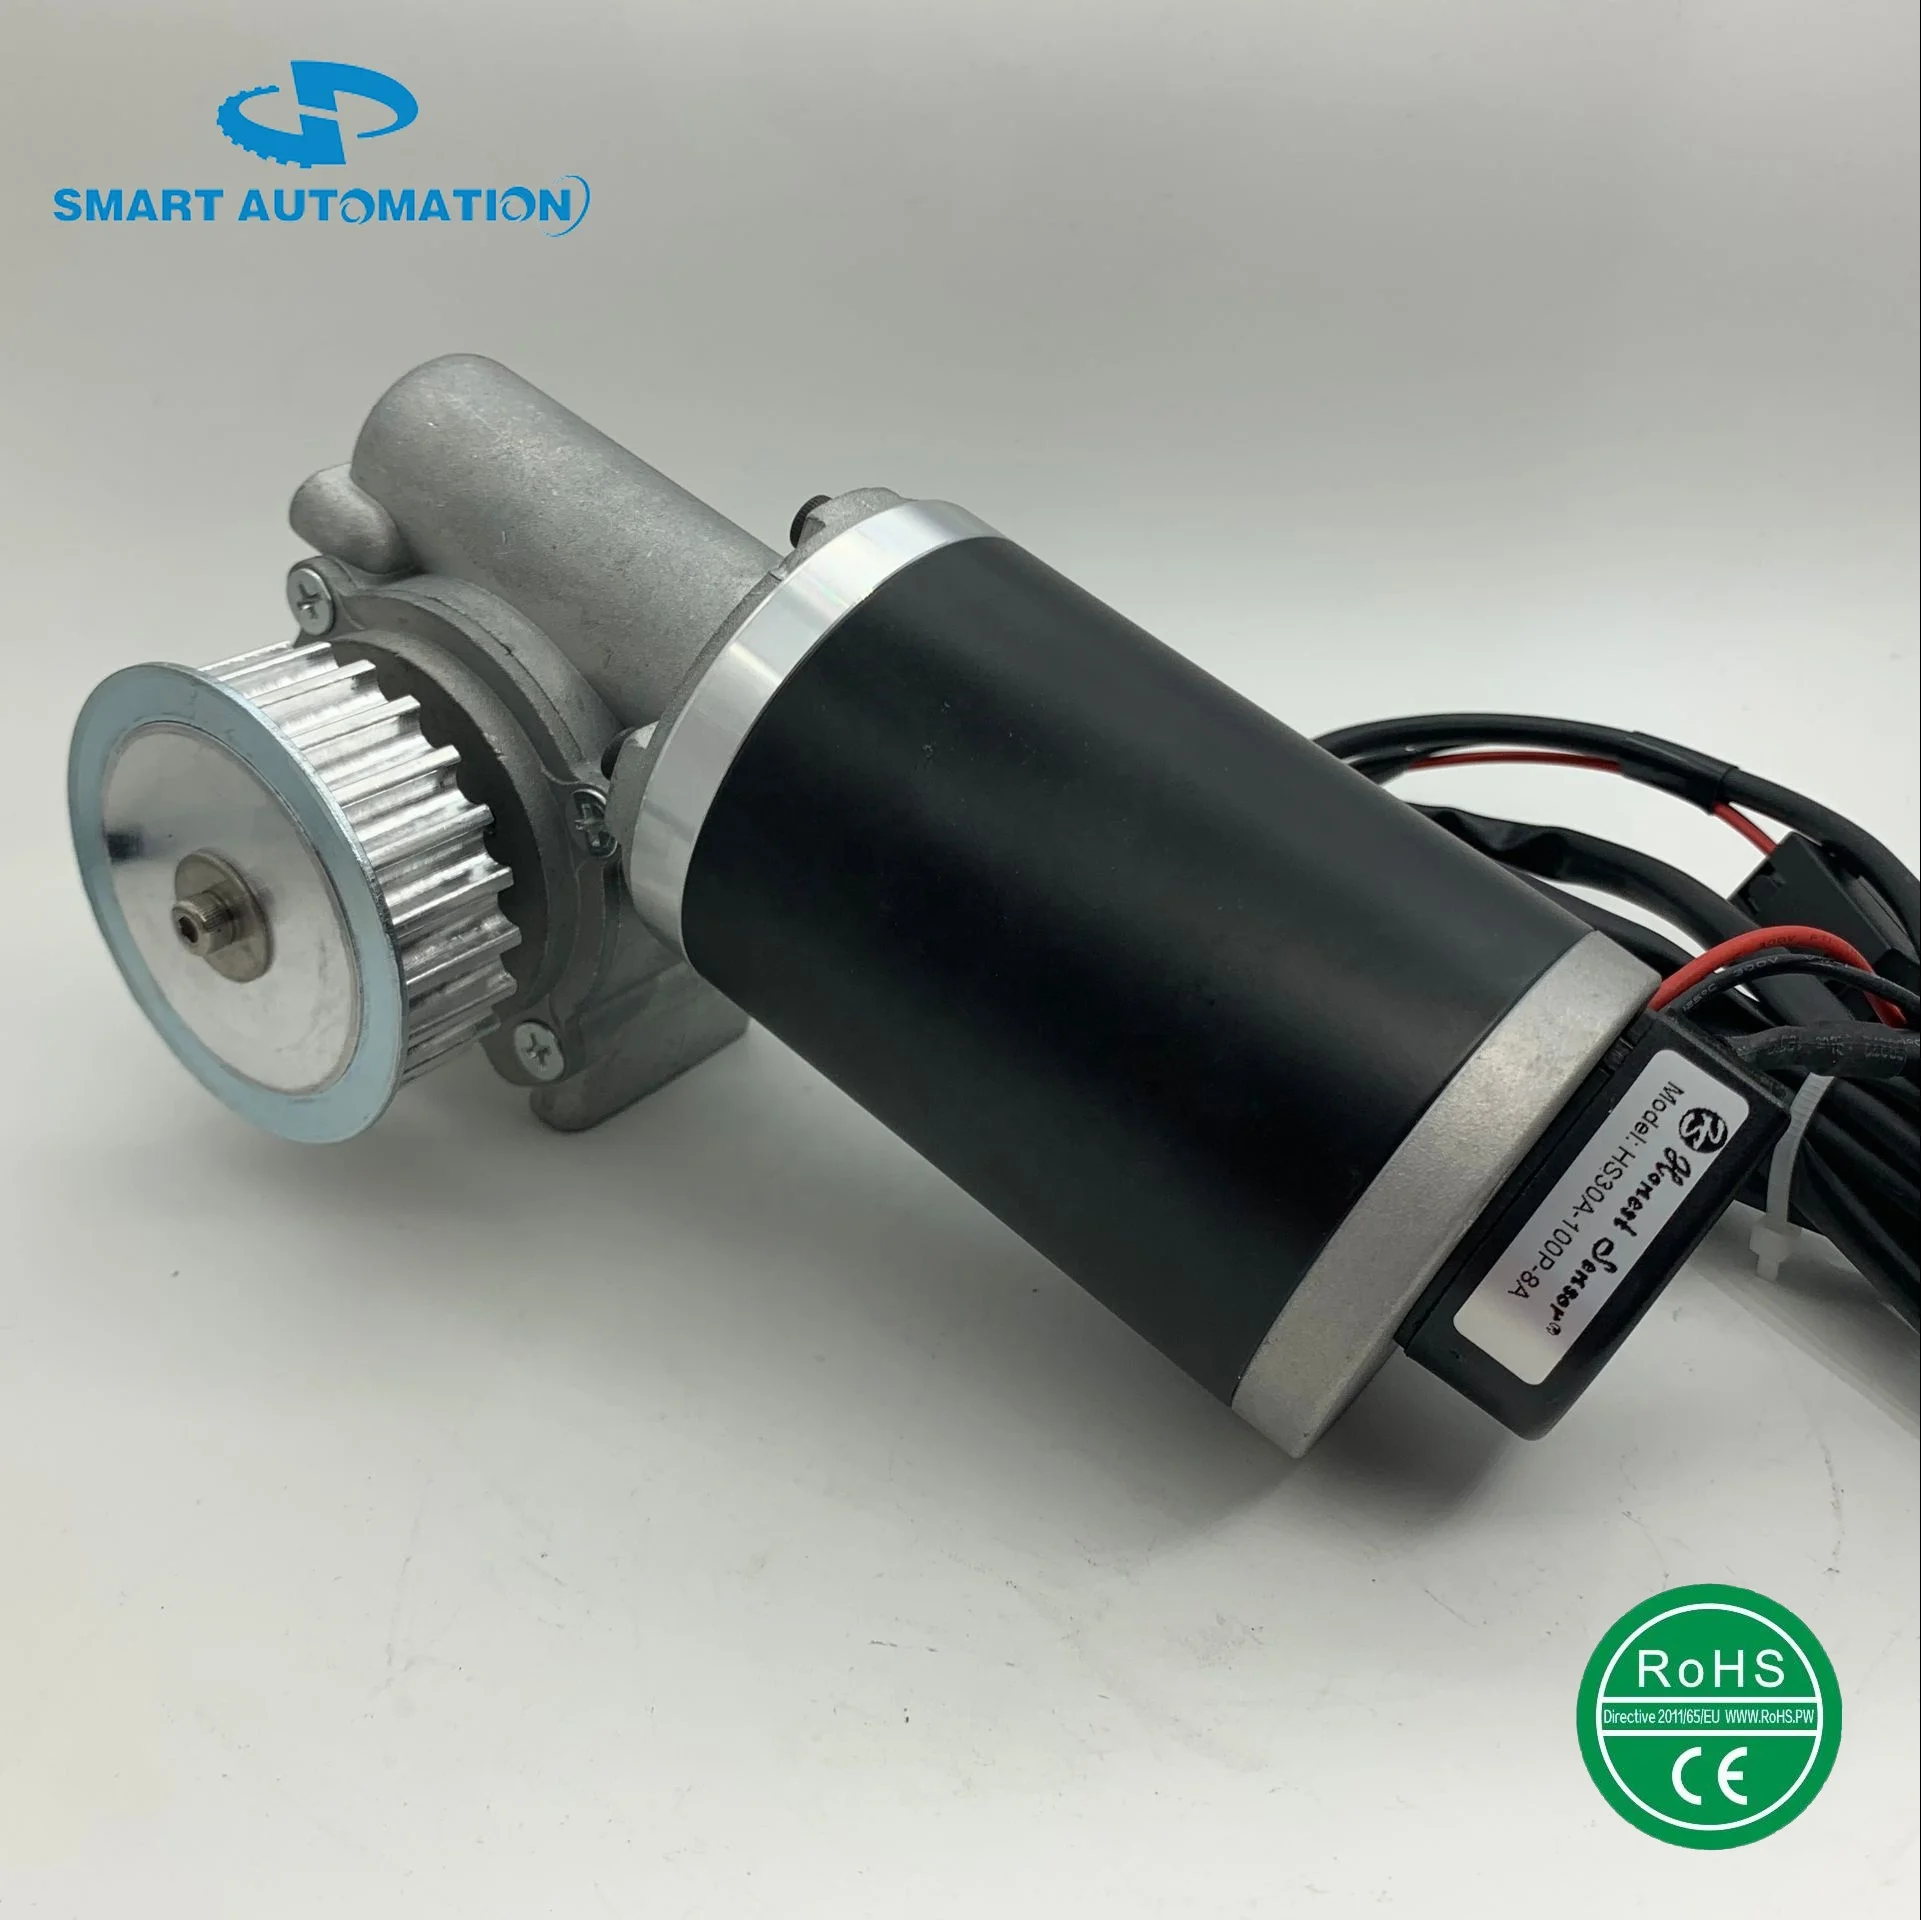 63WG.63ZYT Dc Worm Gear Motor Data Sheet OPTION Optical Encoder 100cpr to 2000cpr